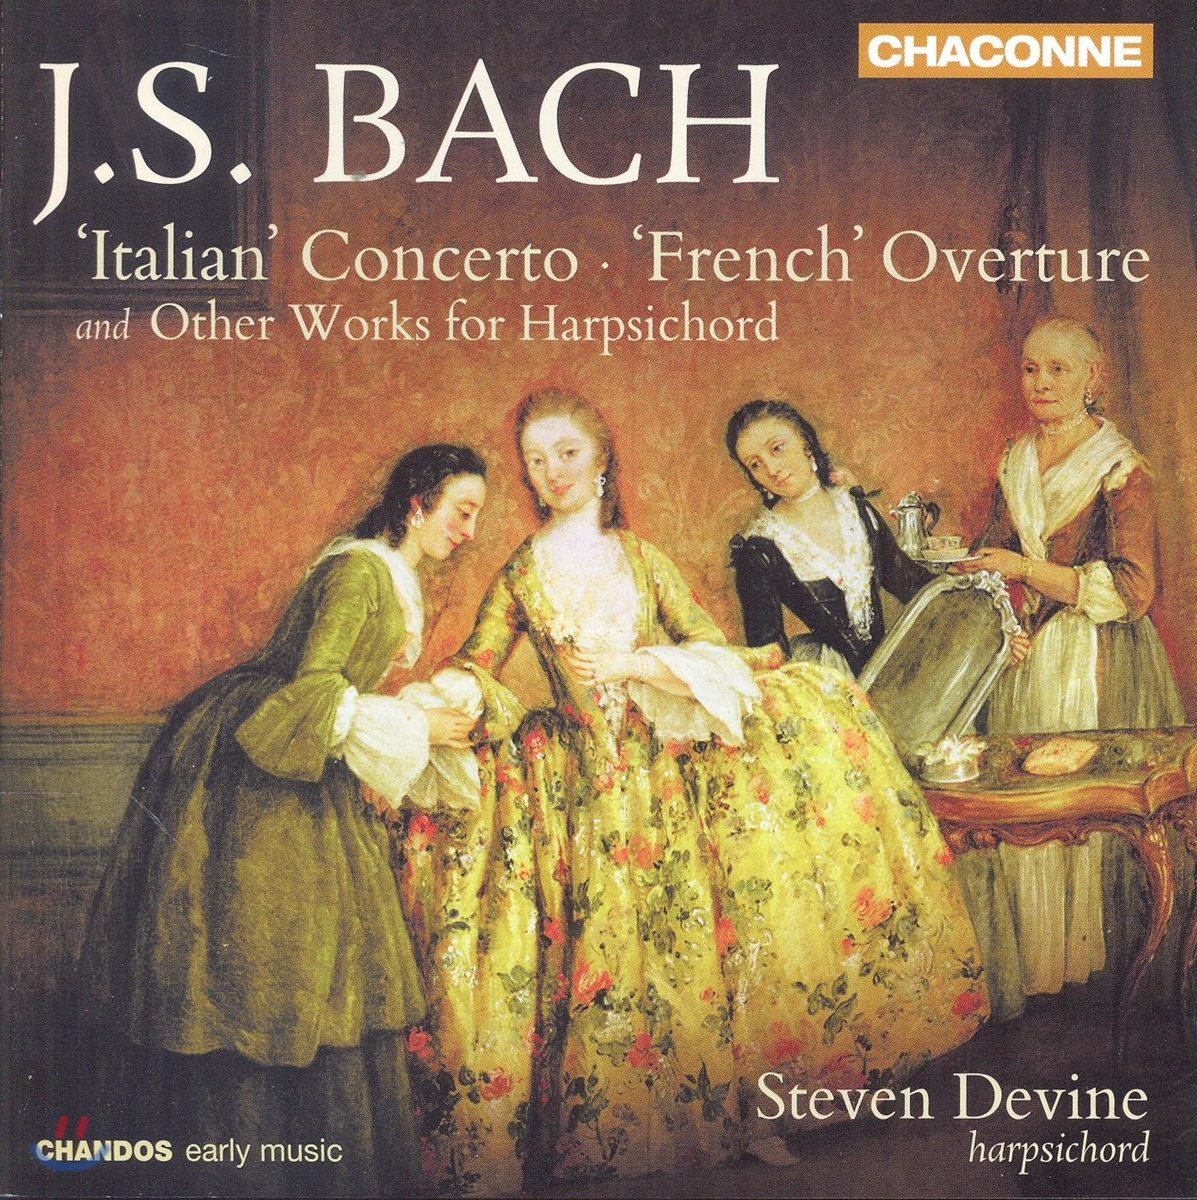 Steven Devine 바흐: 하프시코드를 위한 작품집 (Bach: ‘Italian’ Concerto, ‘French’ Overture, Other Works For Harpsichord)